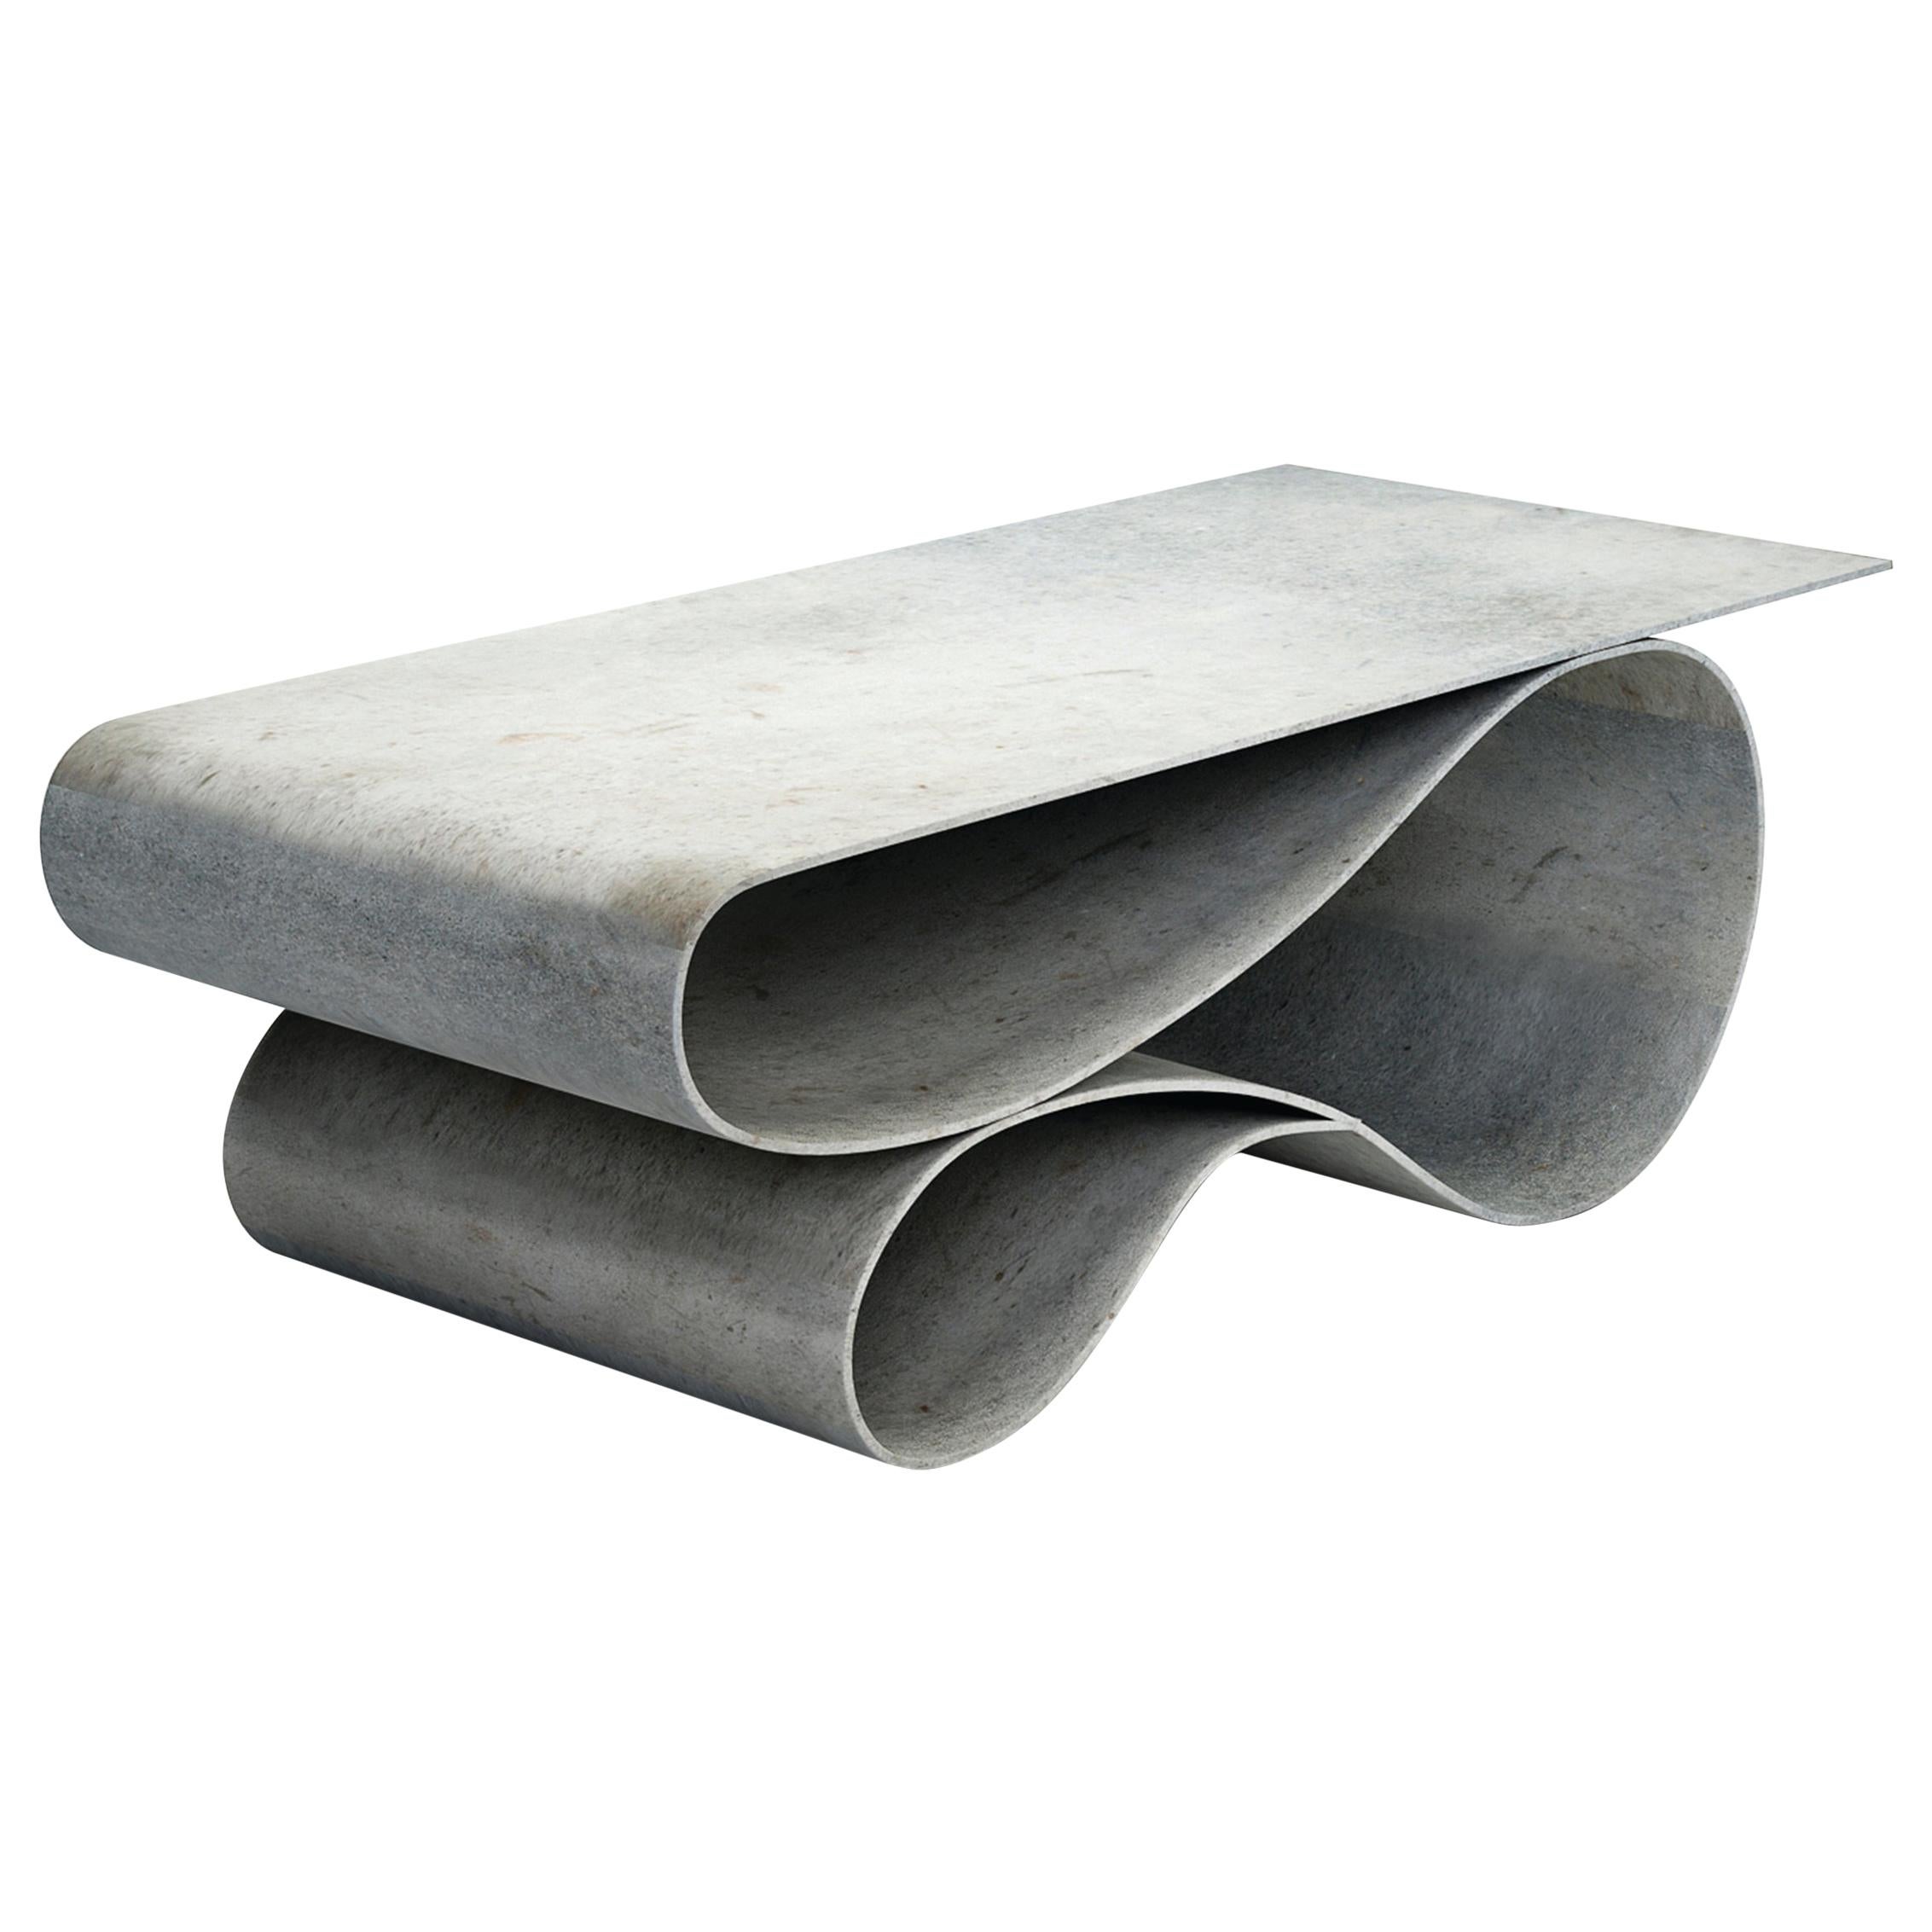 Whorl Coffee Table, From the Concrete Canvas Collection, by Neal Aronowitz For Sale